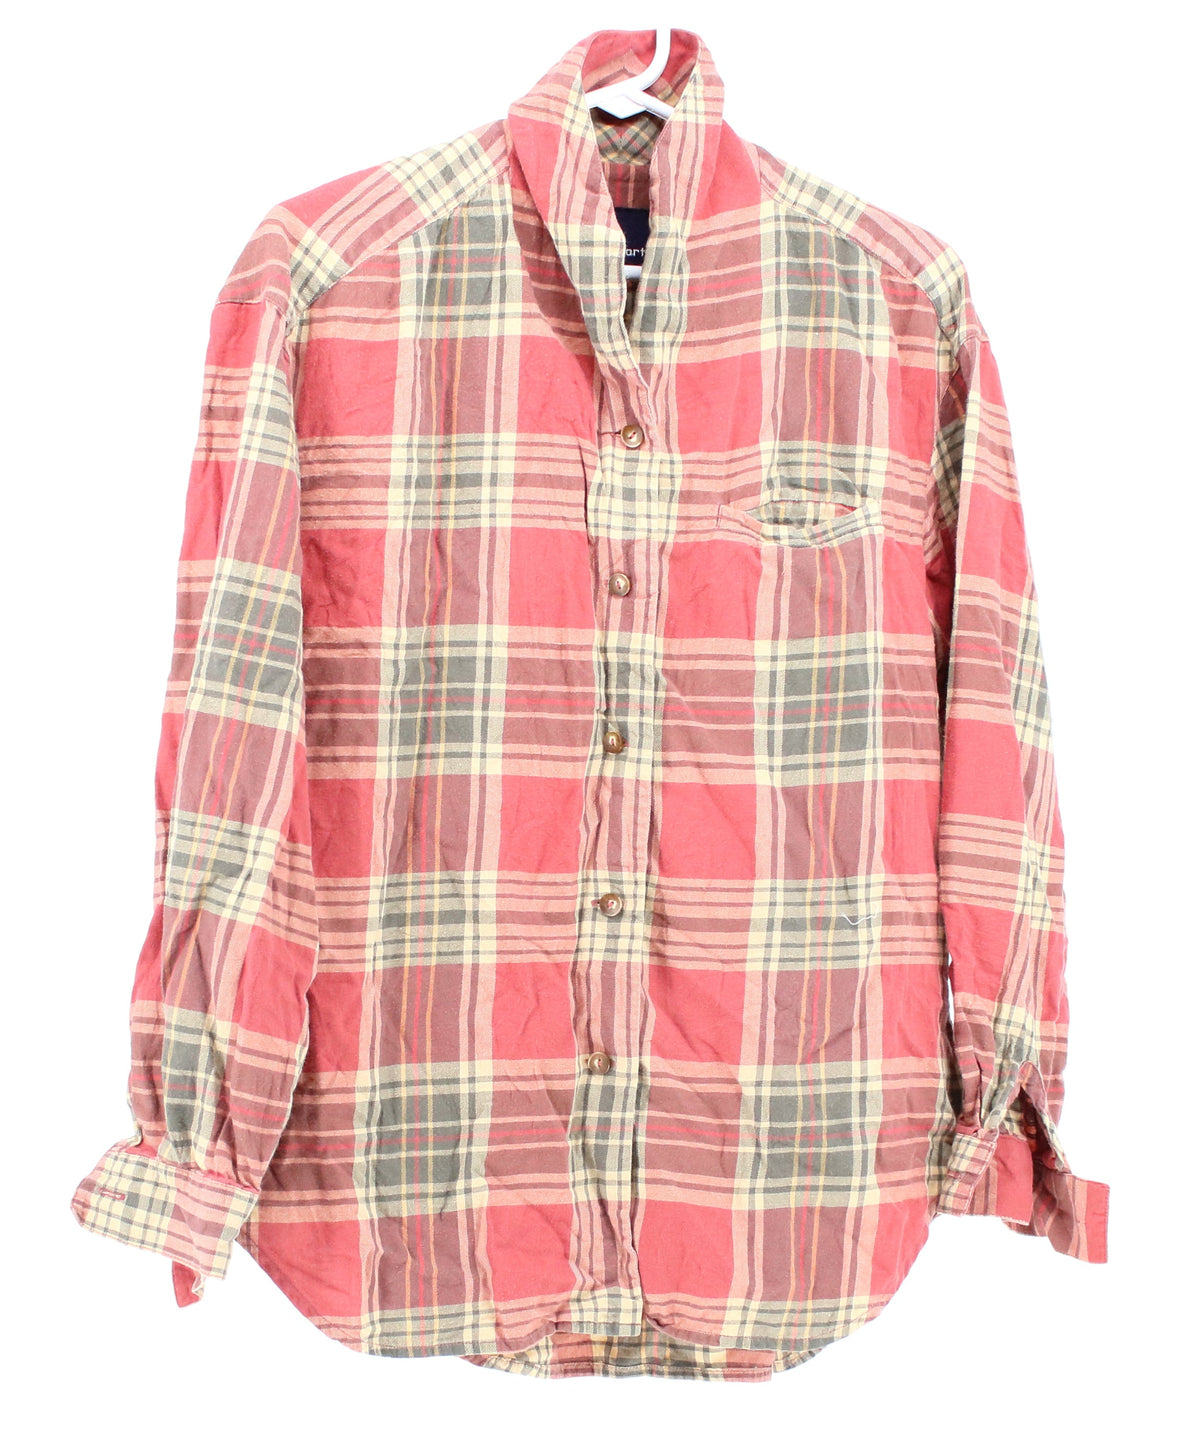 Lizsport Pink And Beige Checkered Blouse